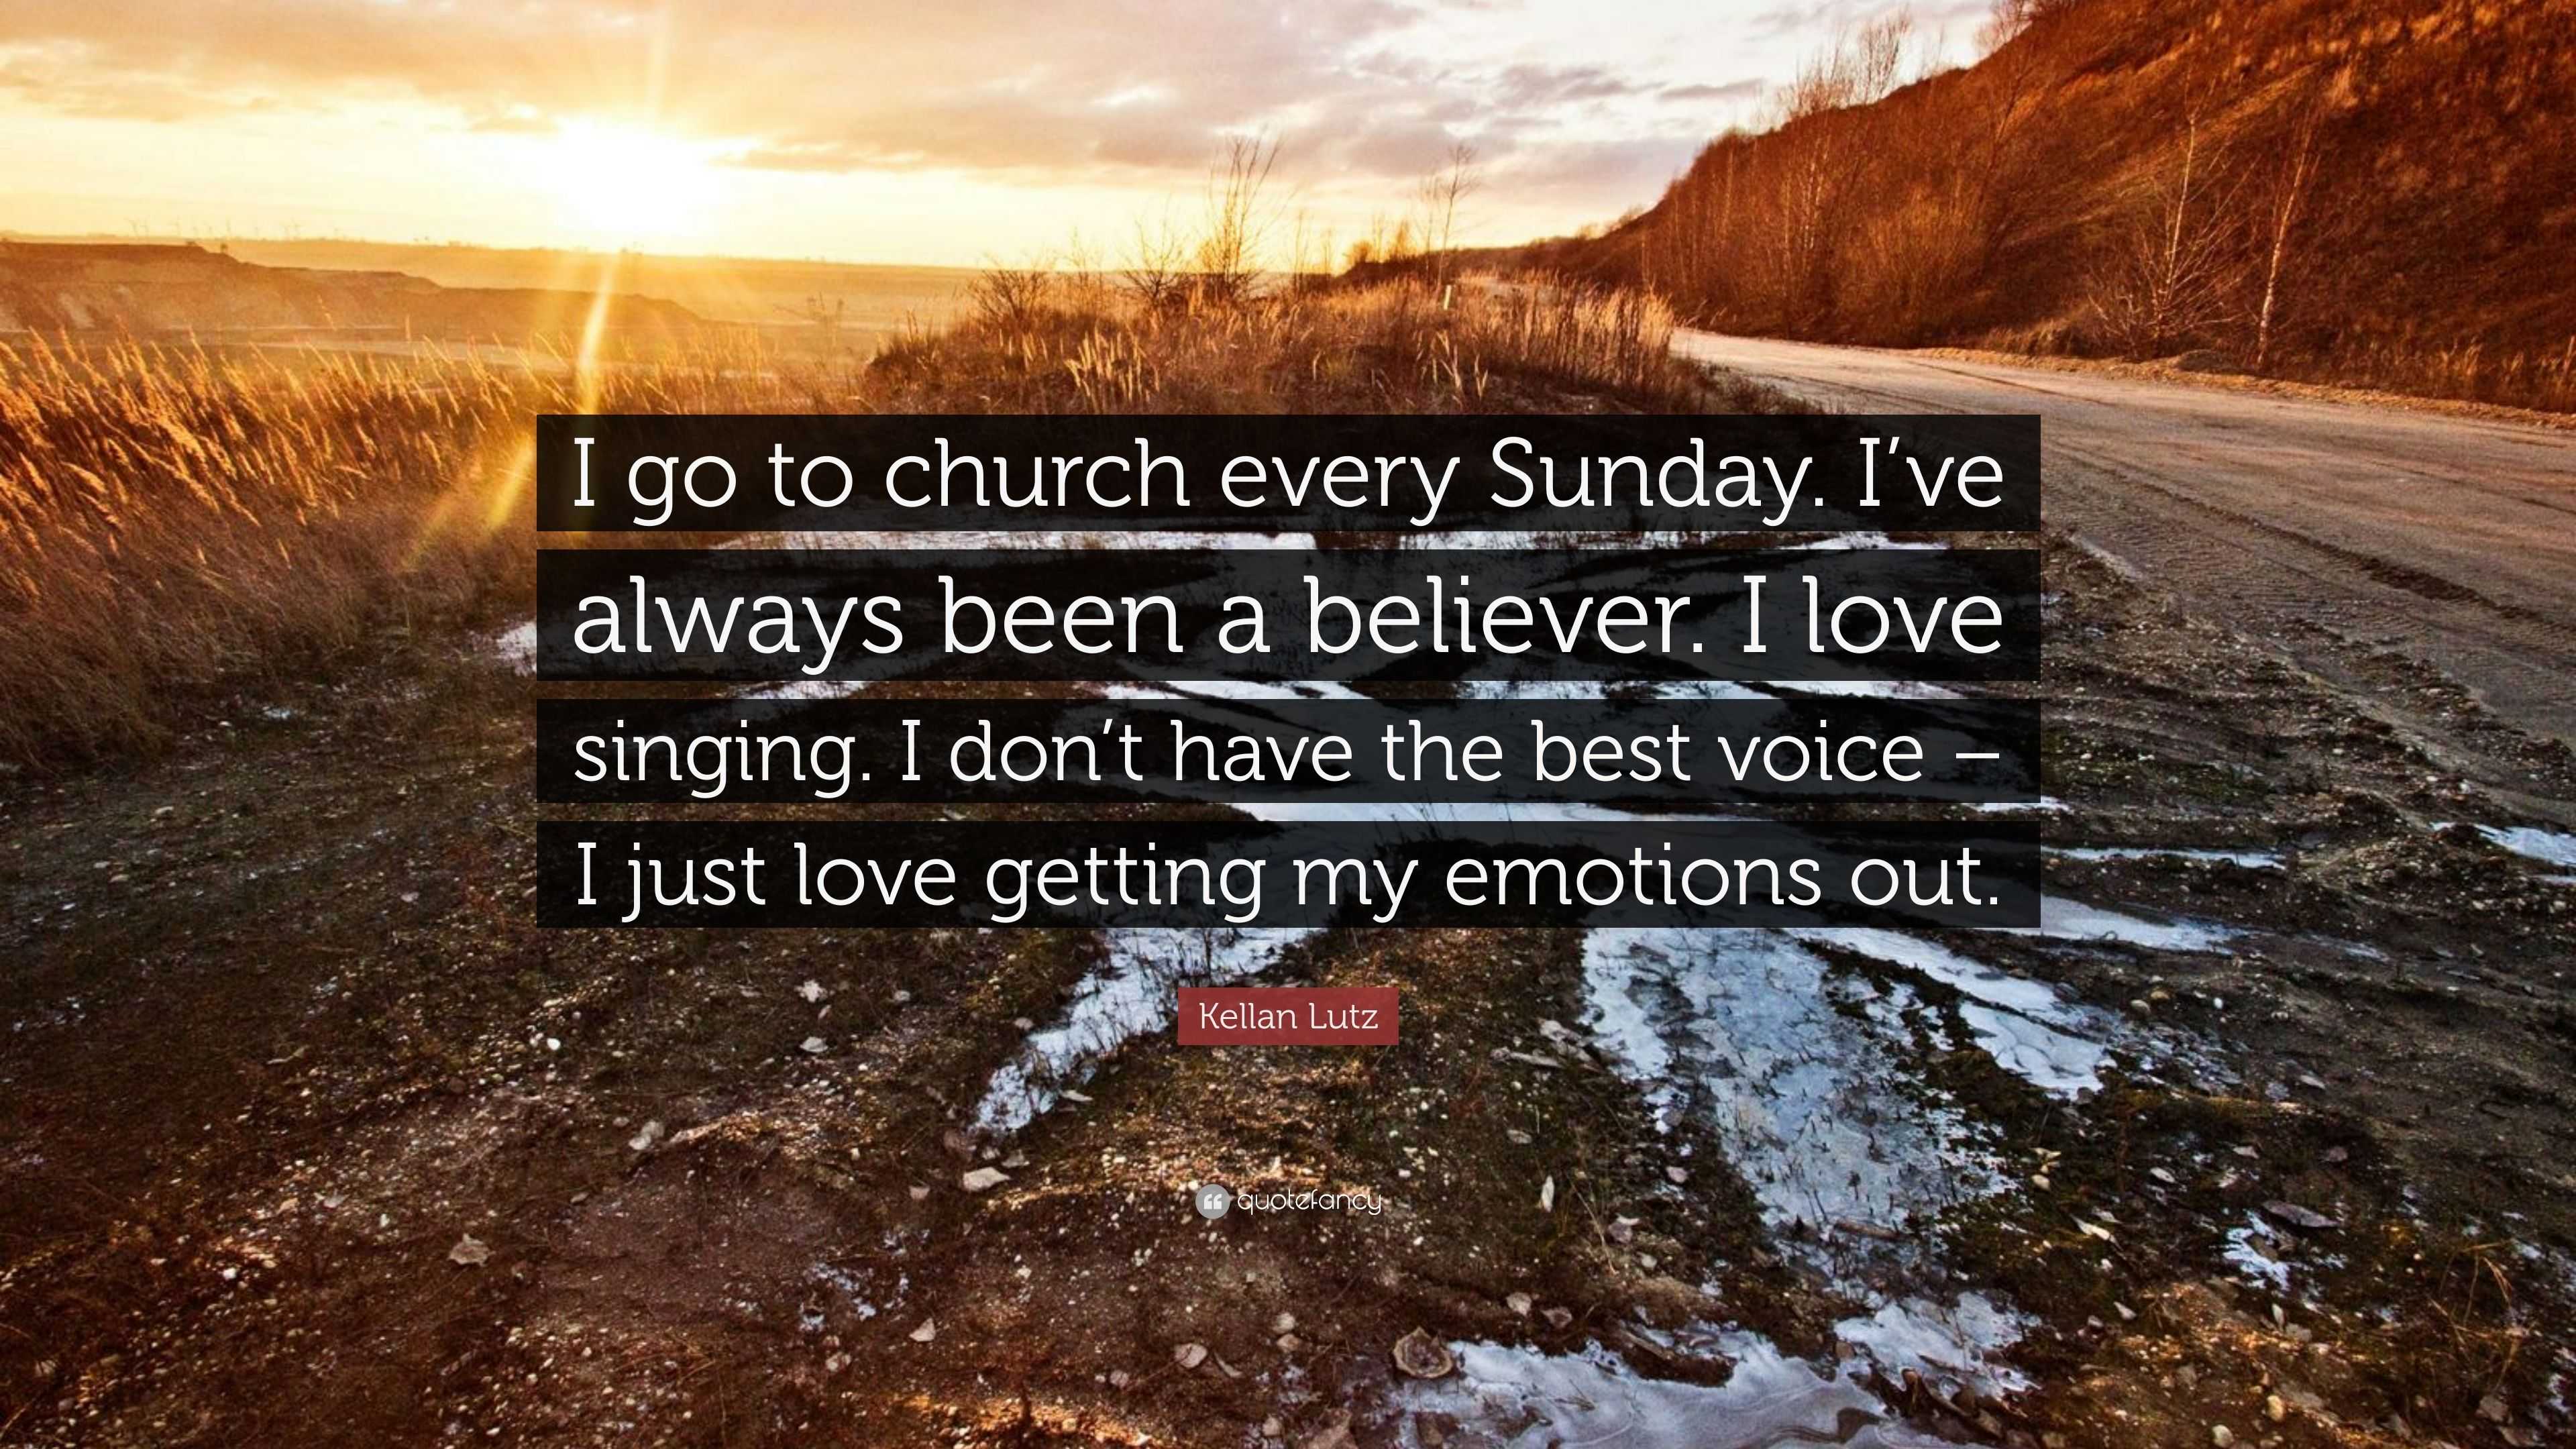 Kellan Lutz Quote “i Go To Church Every Sunday I Ve Always Been A Believer I Love Singing I